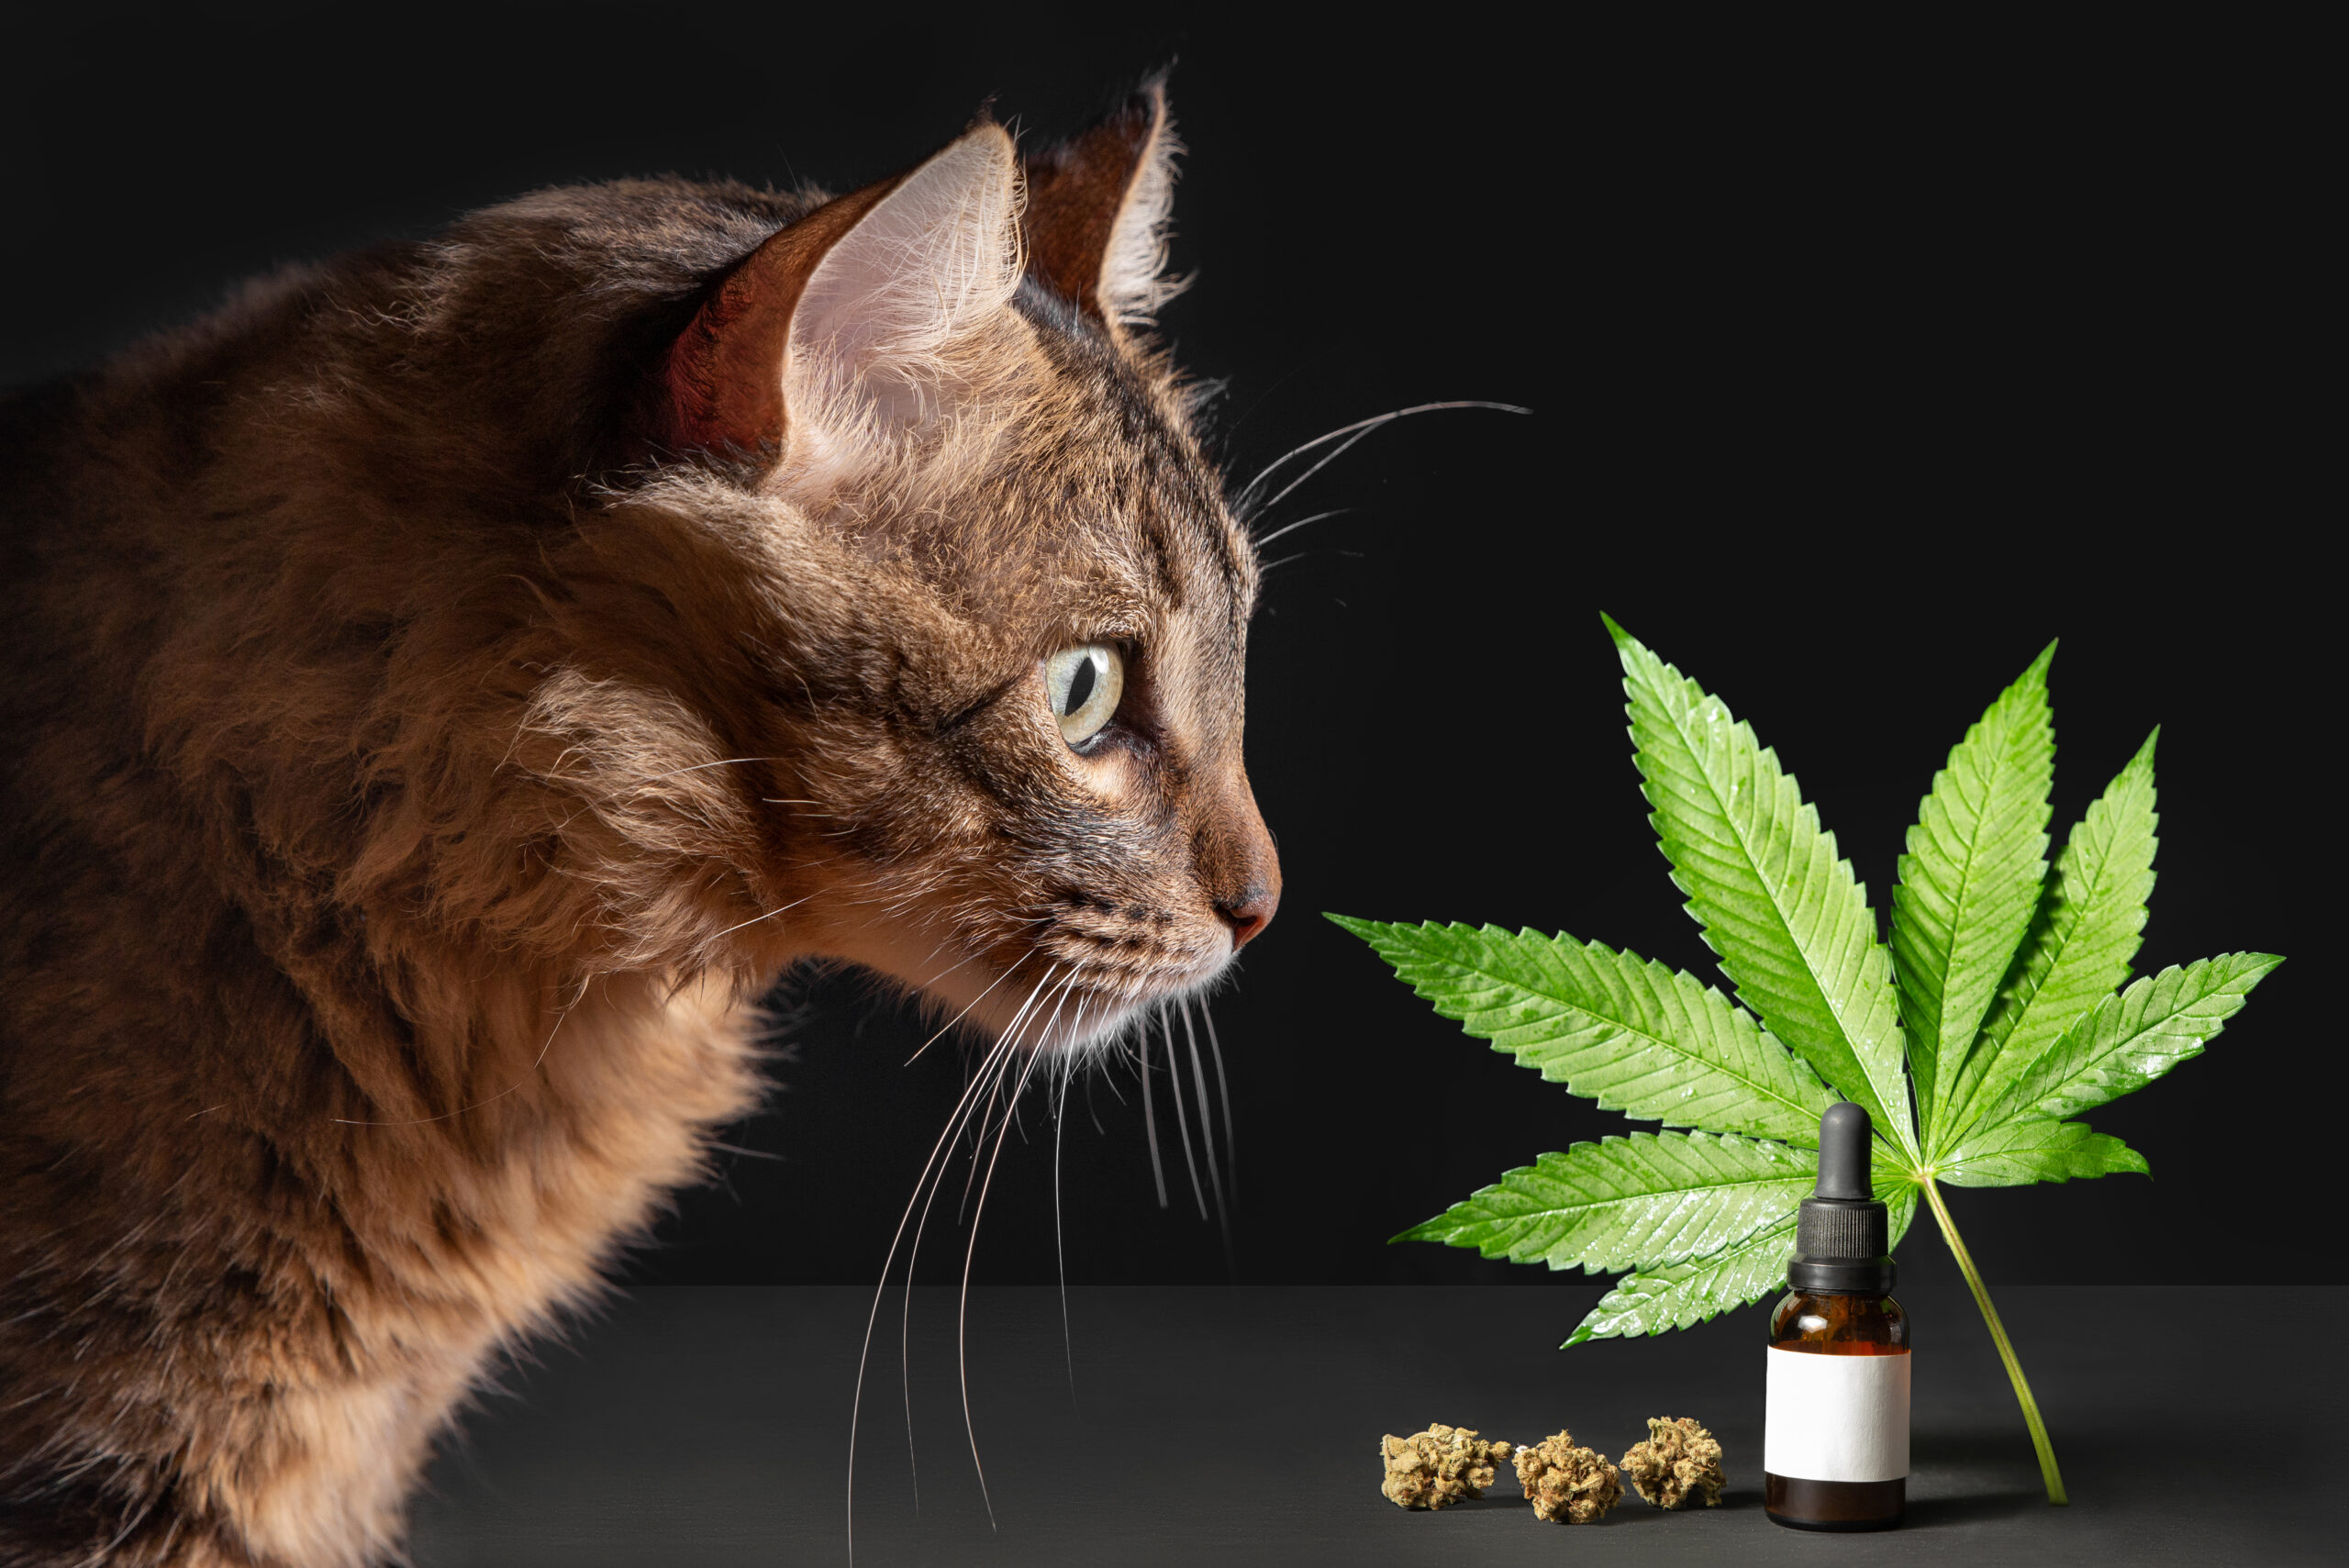 CBD for pets, healthcare and medical about cannabis, hemp, marijuana extract oil and weed, cat on black background.